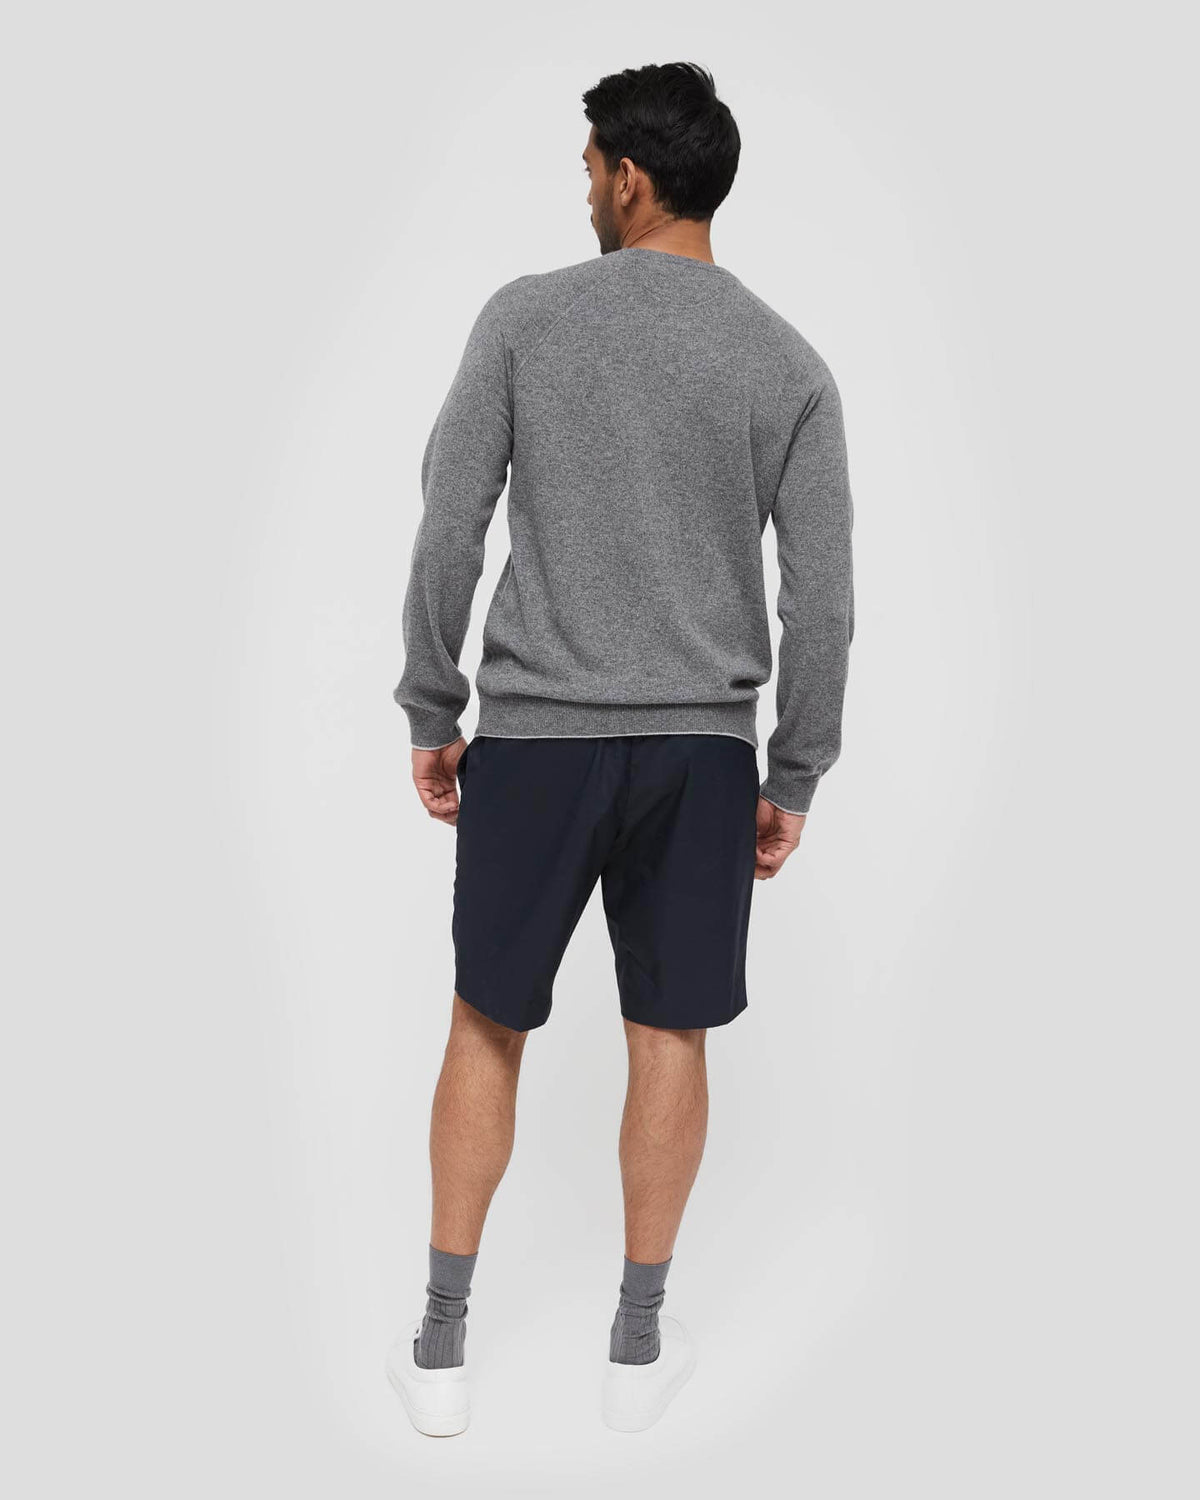 Cadorna Wool and Cashmere Unisex Sweater